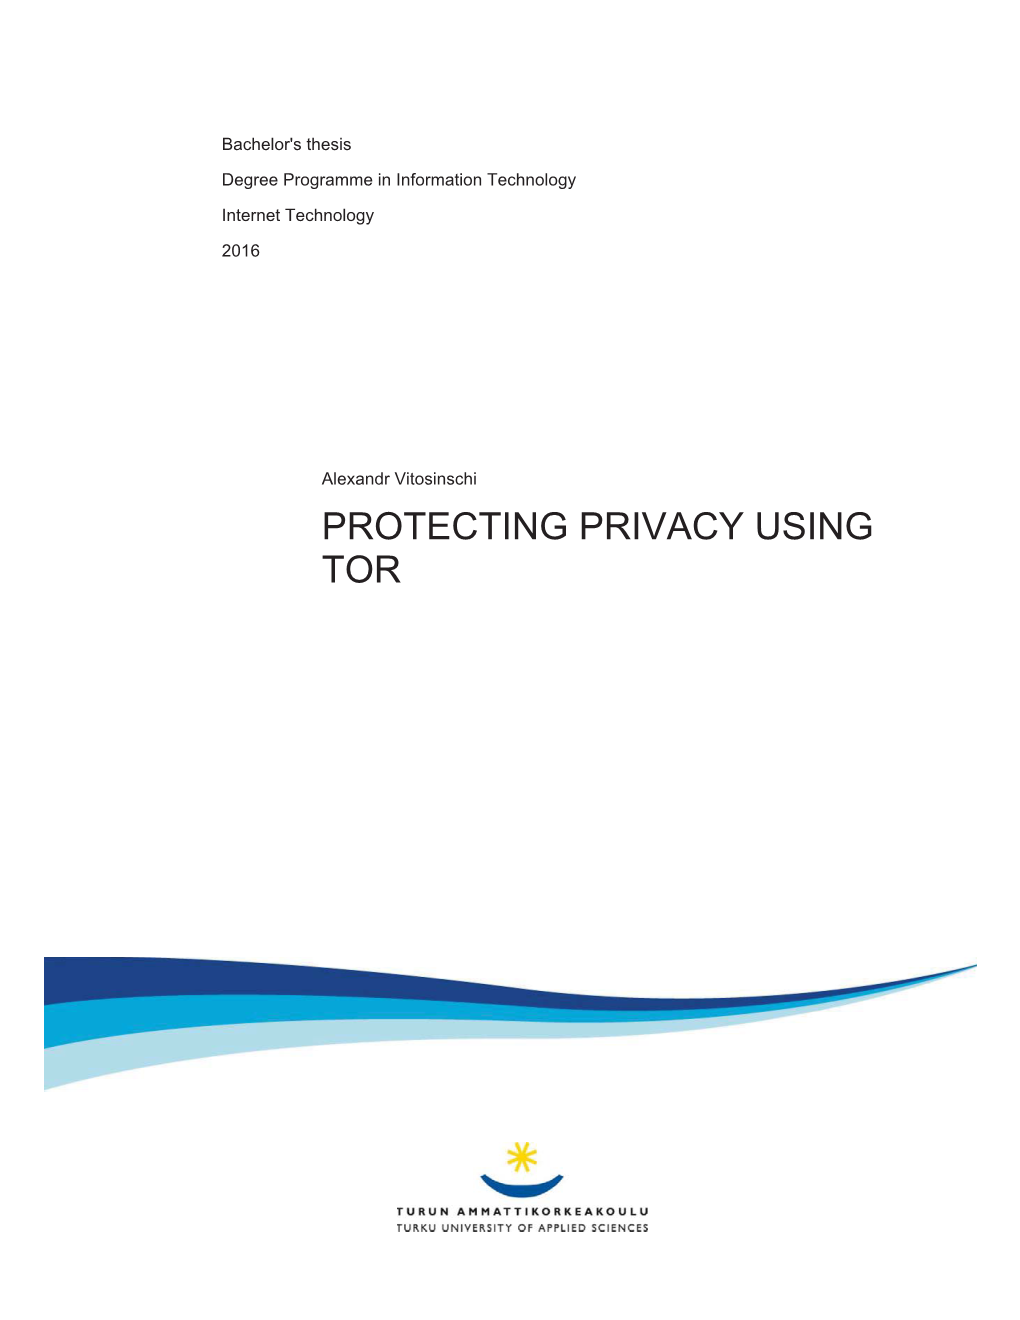 Protecting Privacy Using Tor